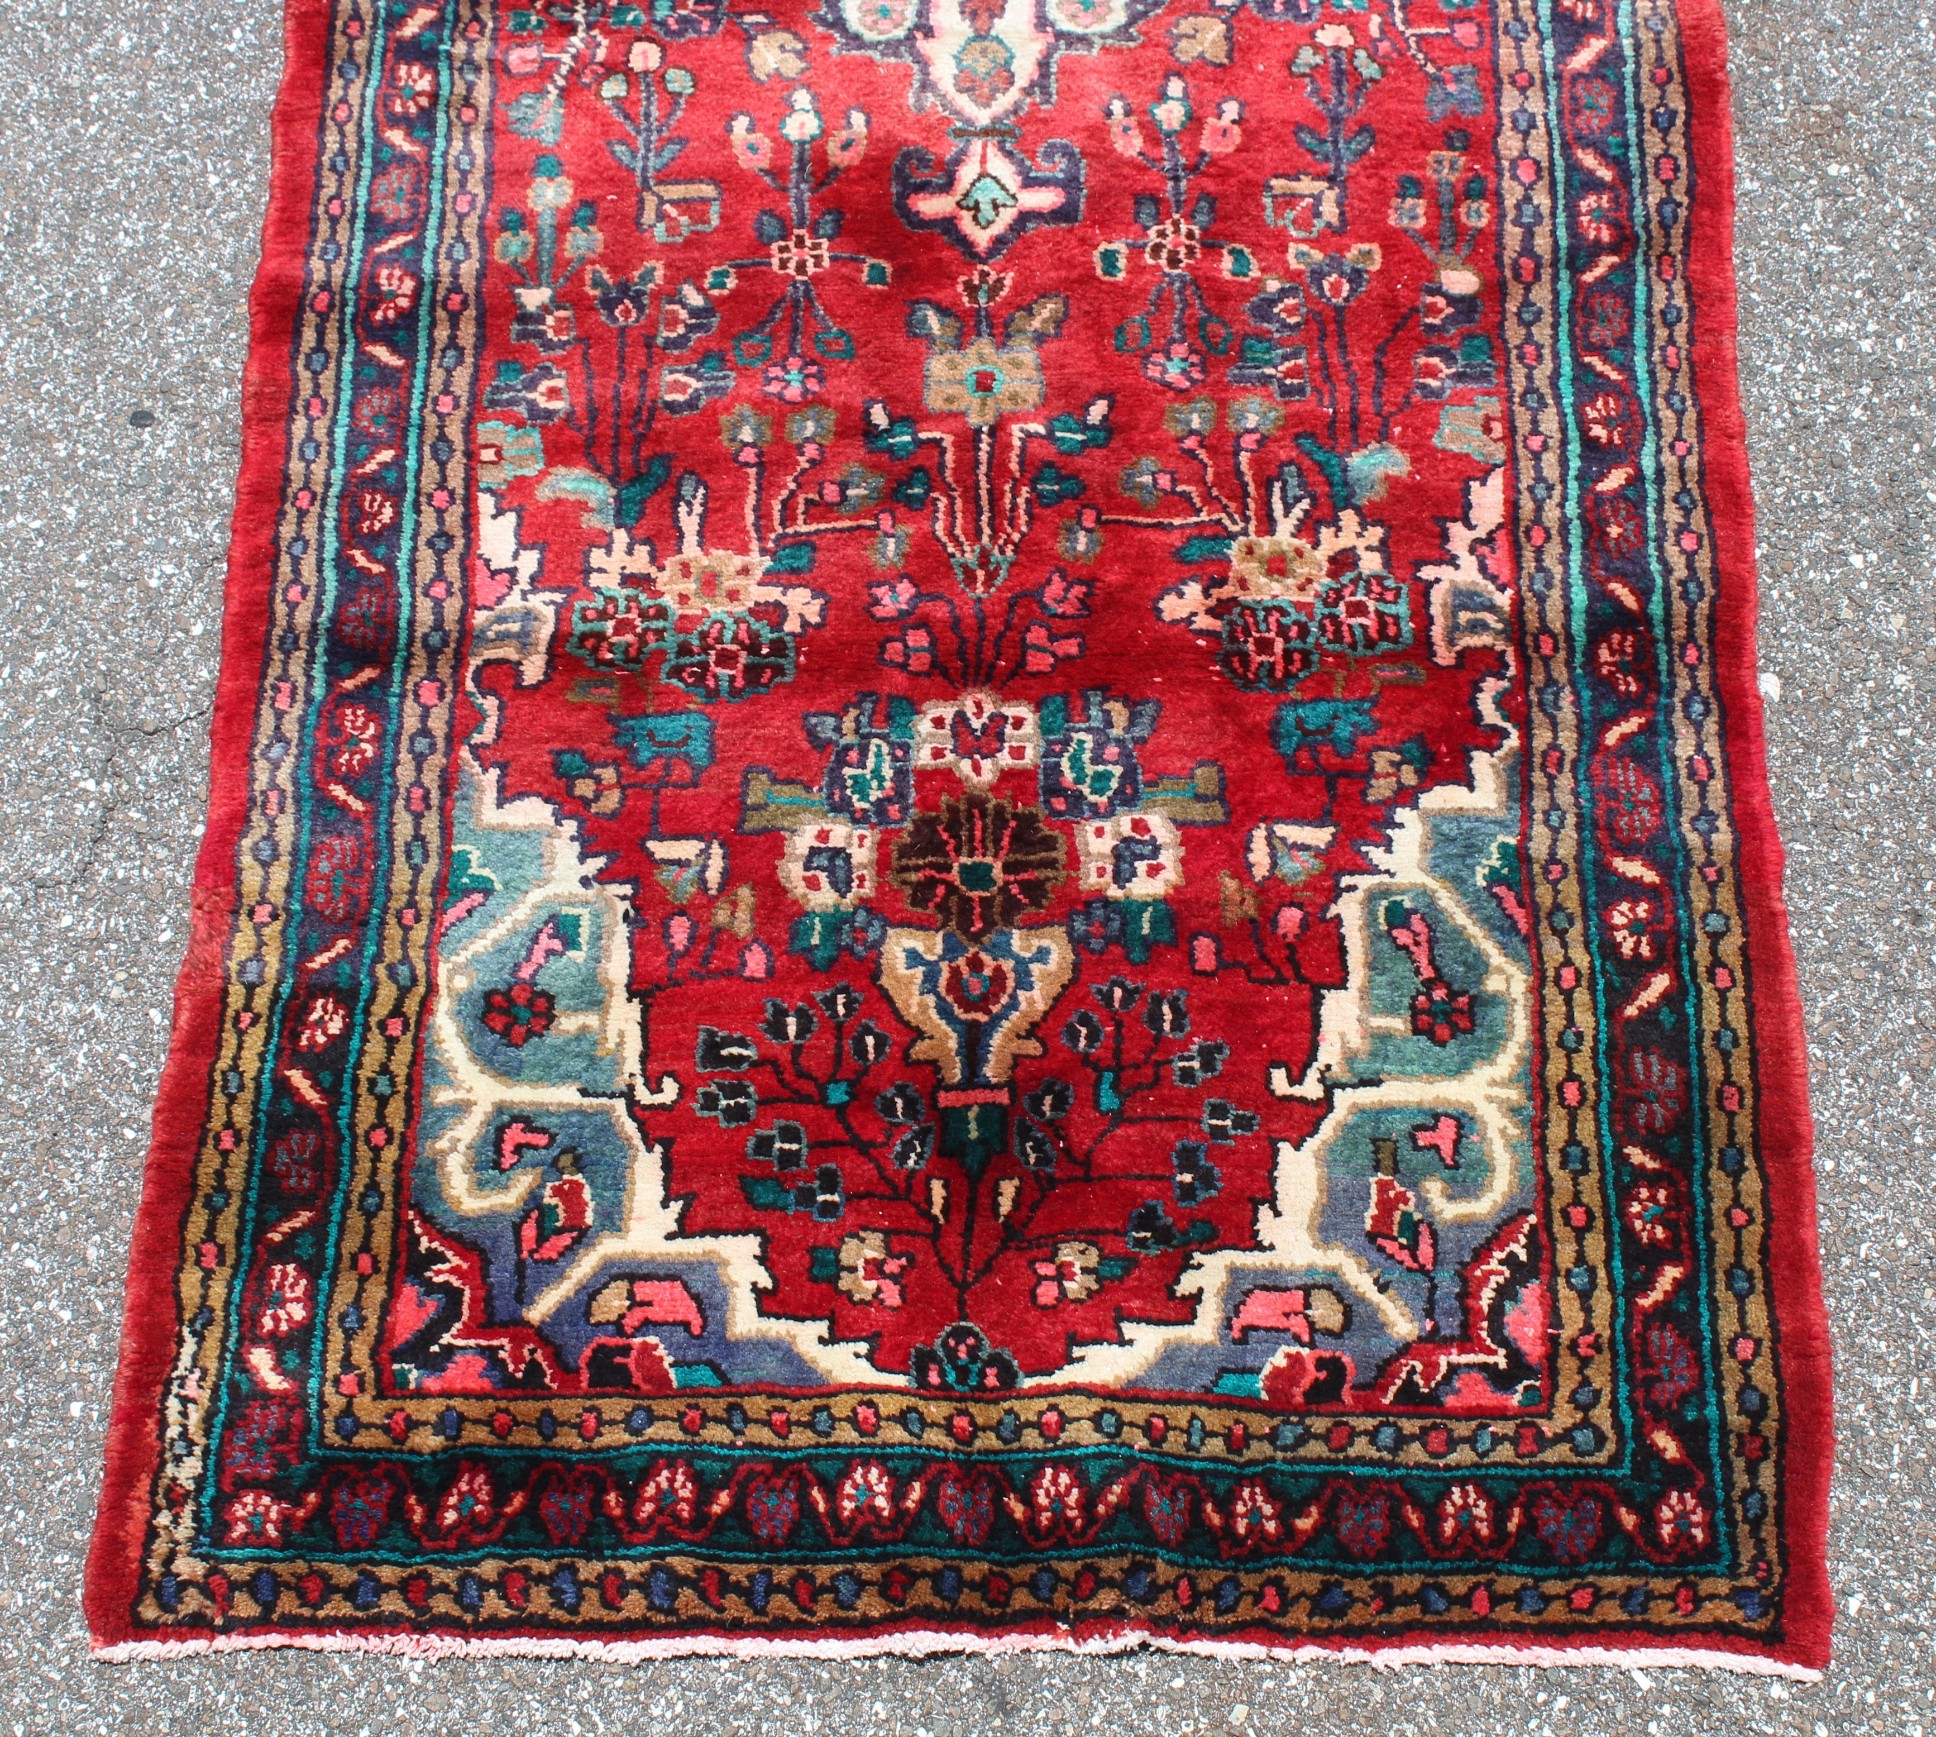 Sharuq Hand-Knotted Persian Wool Rug - 3'7" x 10' - Image 2 of 10